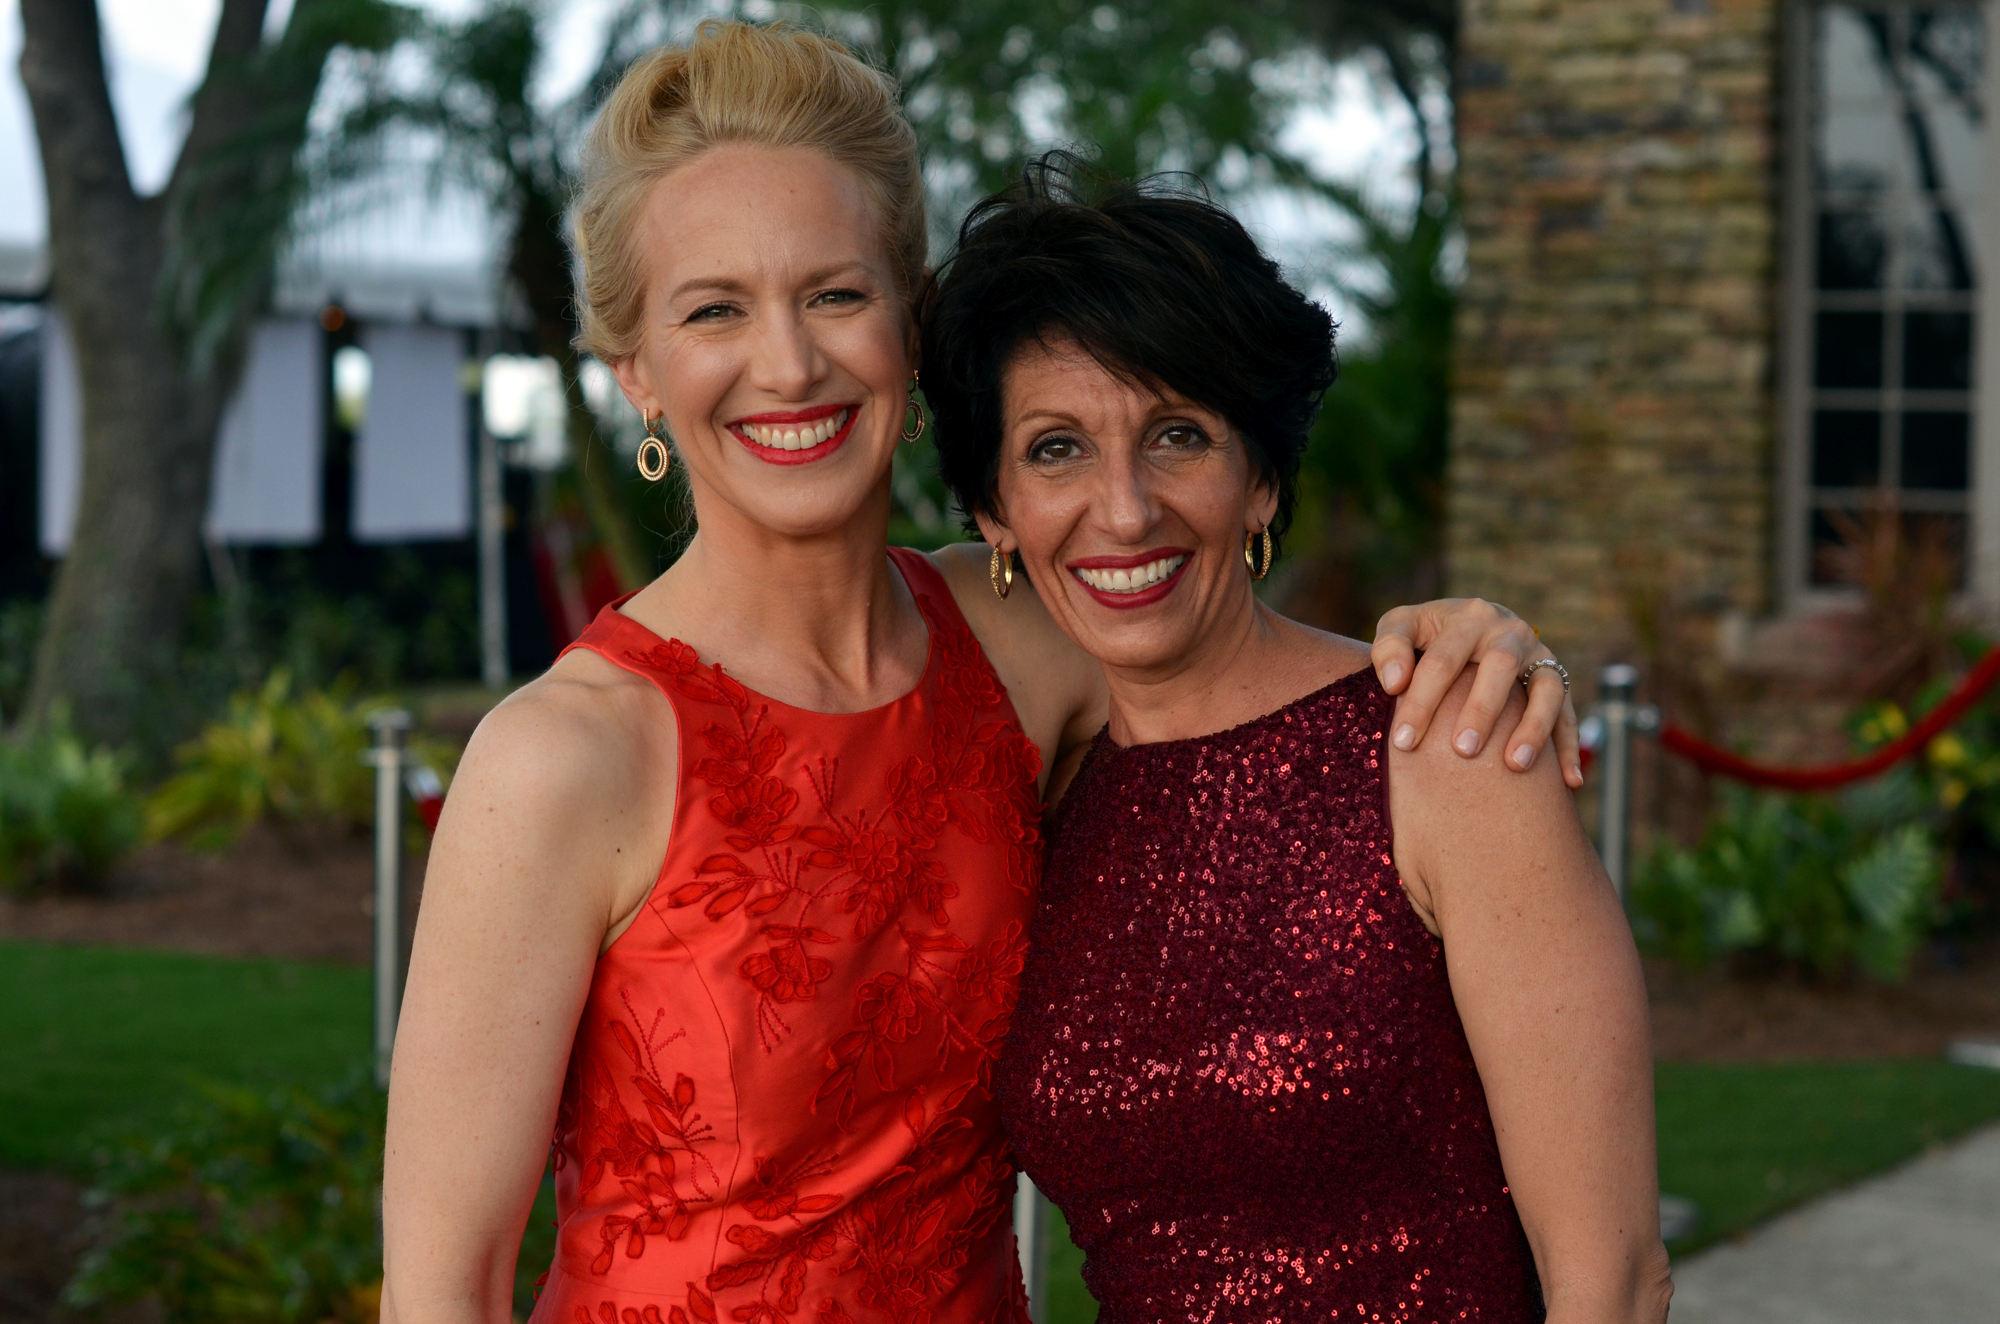 Event Chairwoman Ariane Dart and Forty Carrots Executive Director Michelle Kapreilian at the 6th Annual Firefly Gala on Saturday, April 30, at The Ritz-Carlton Members Golf Club. Photo by Heather Merriman Saba